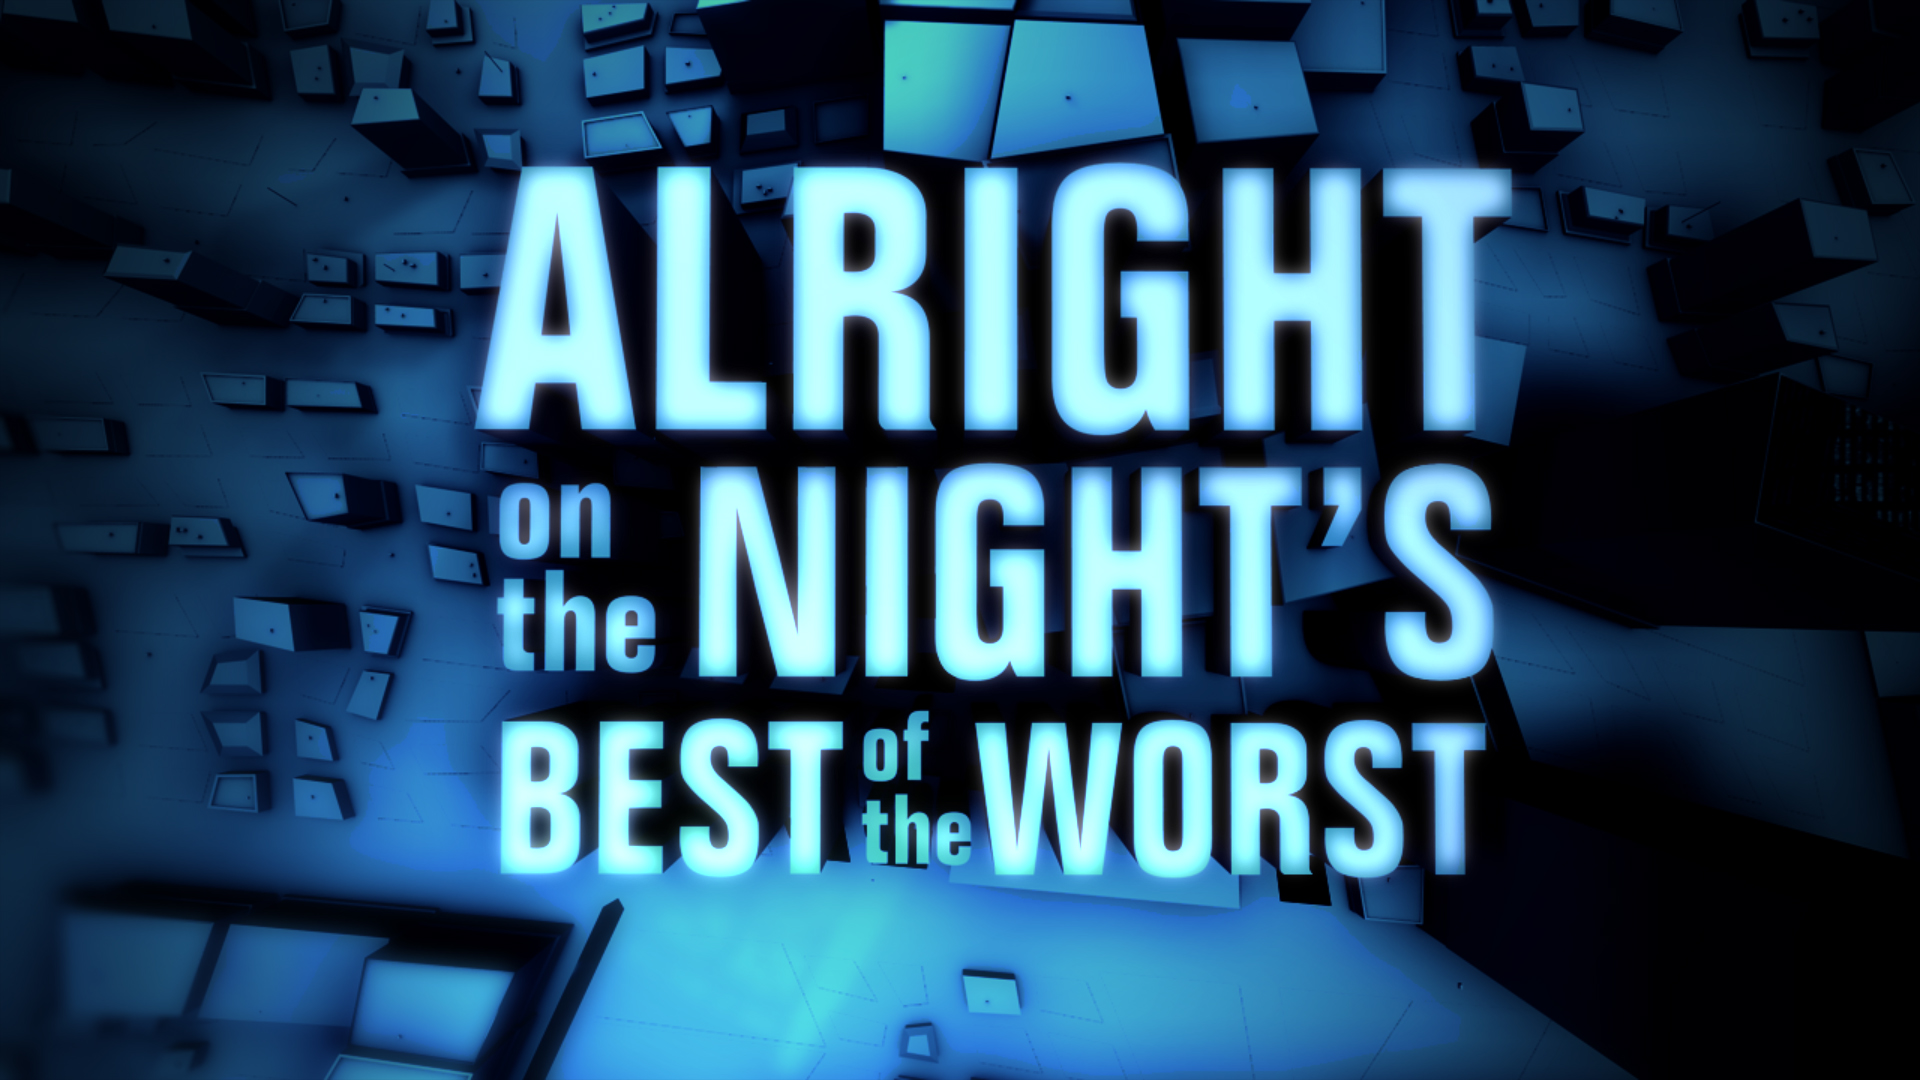 It'll Be Alright - Best and Worst